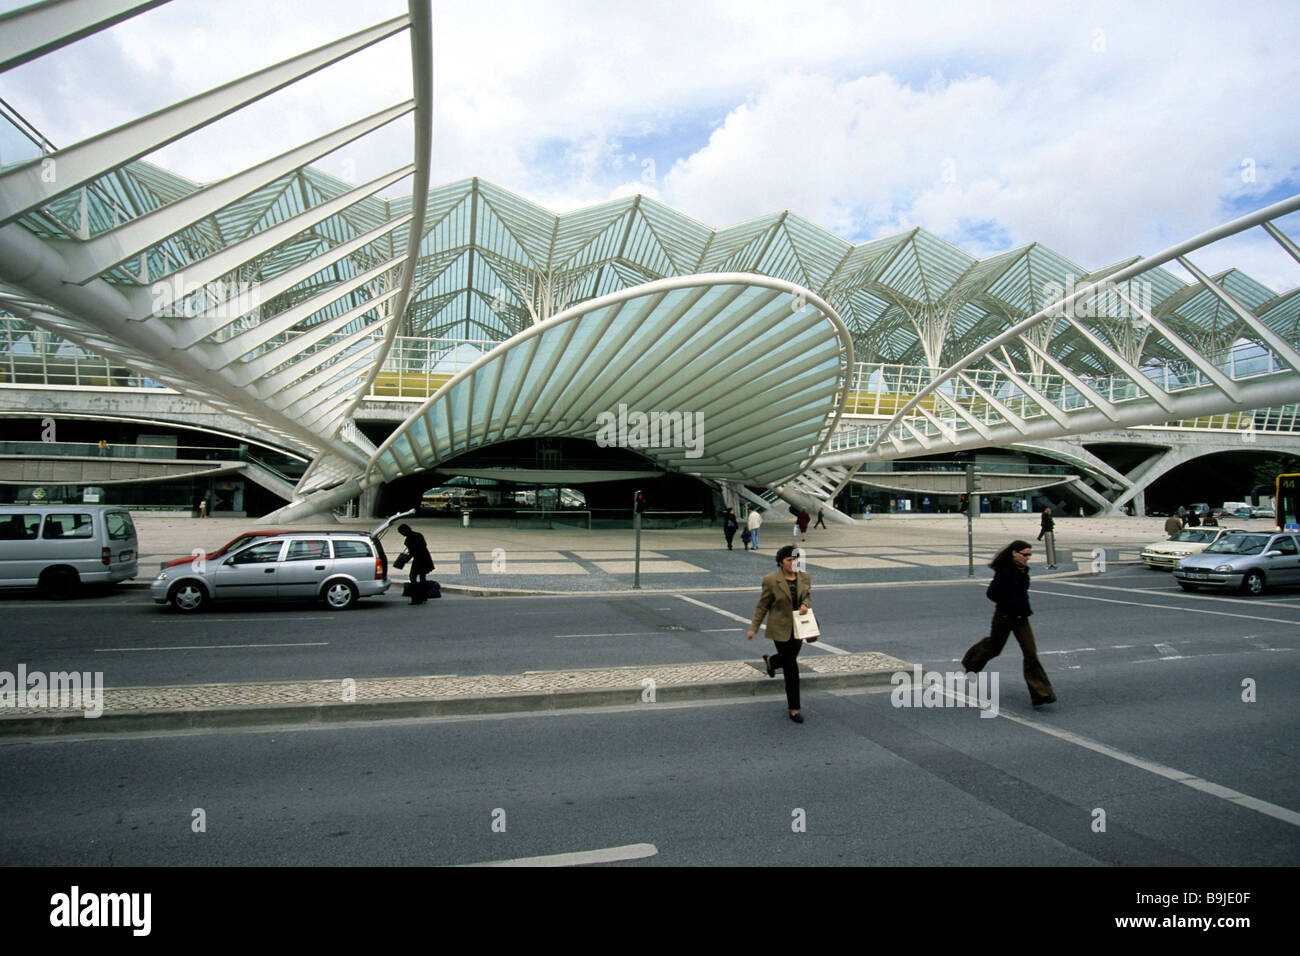 Gare Oriente Station, roofing, road with modern architecture, designed by the architect Santiago Calatrava, Parque das Nacoes,  Stock Photo